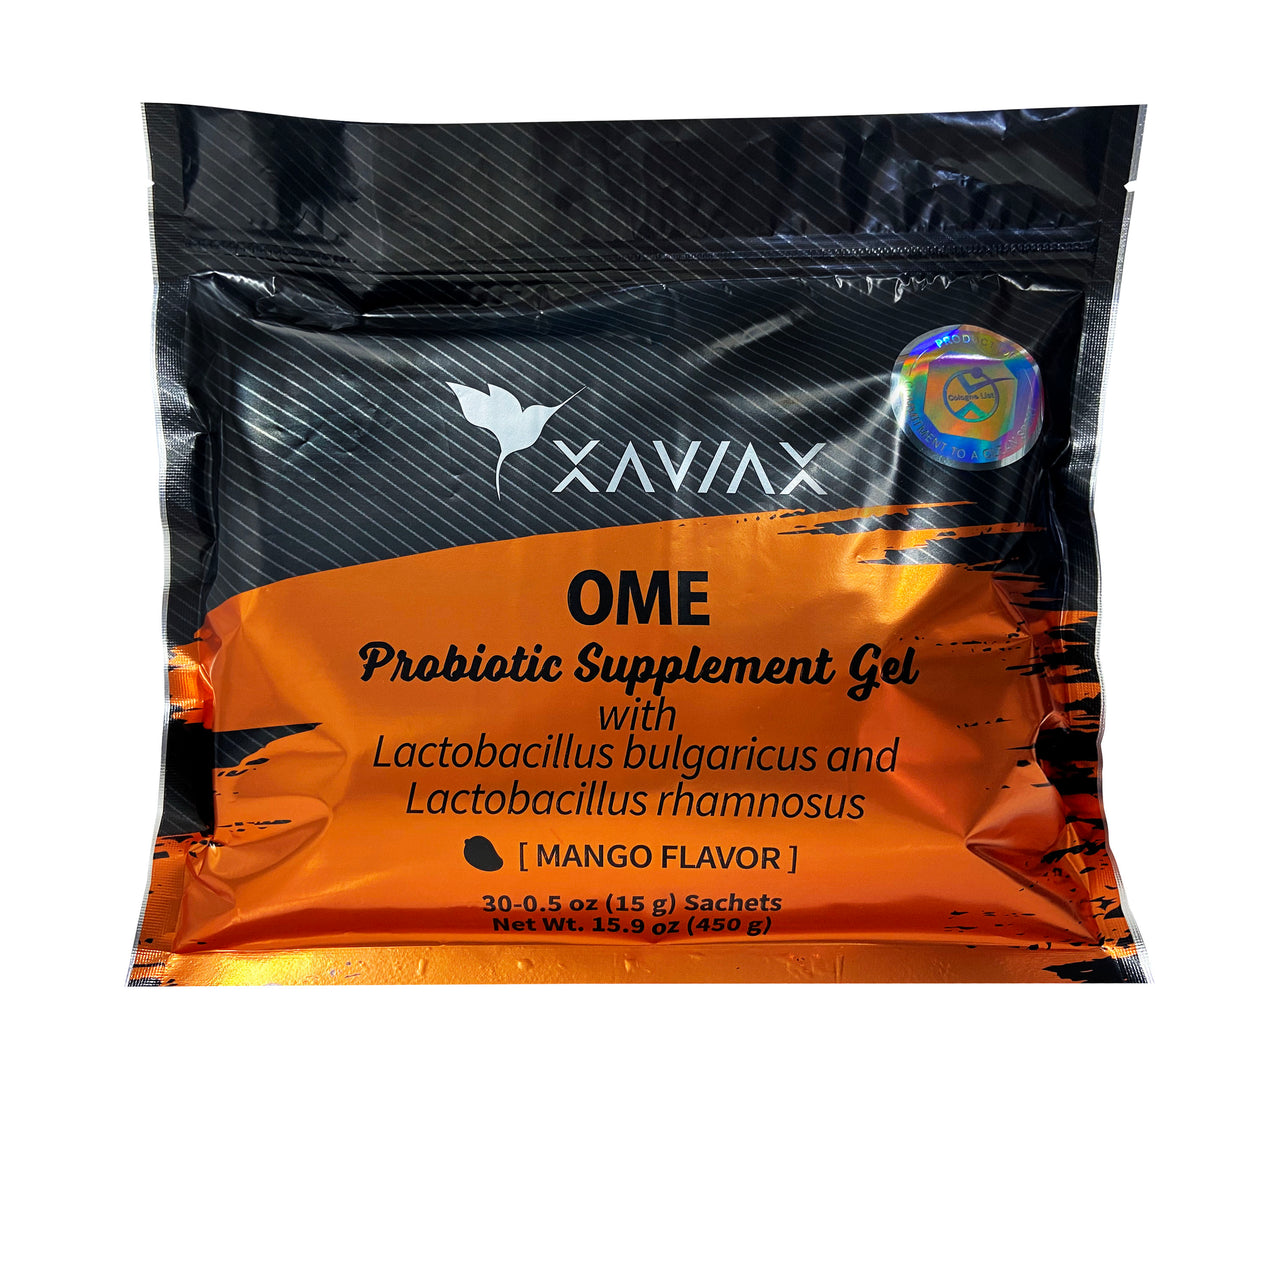 ome probiotics with omega 3